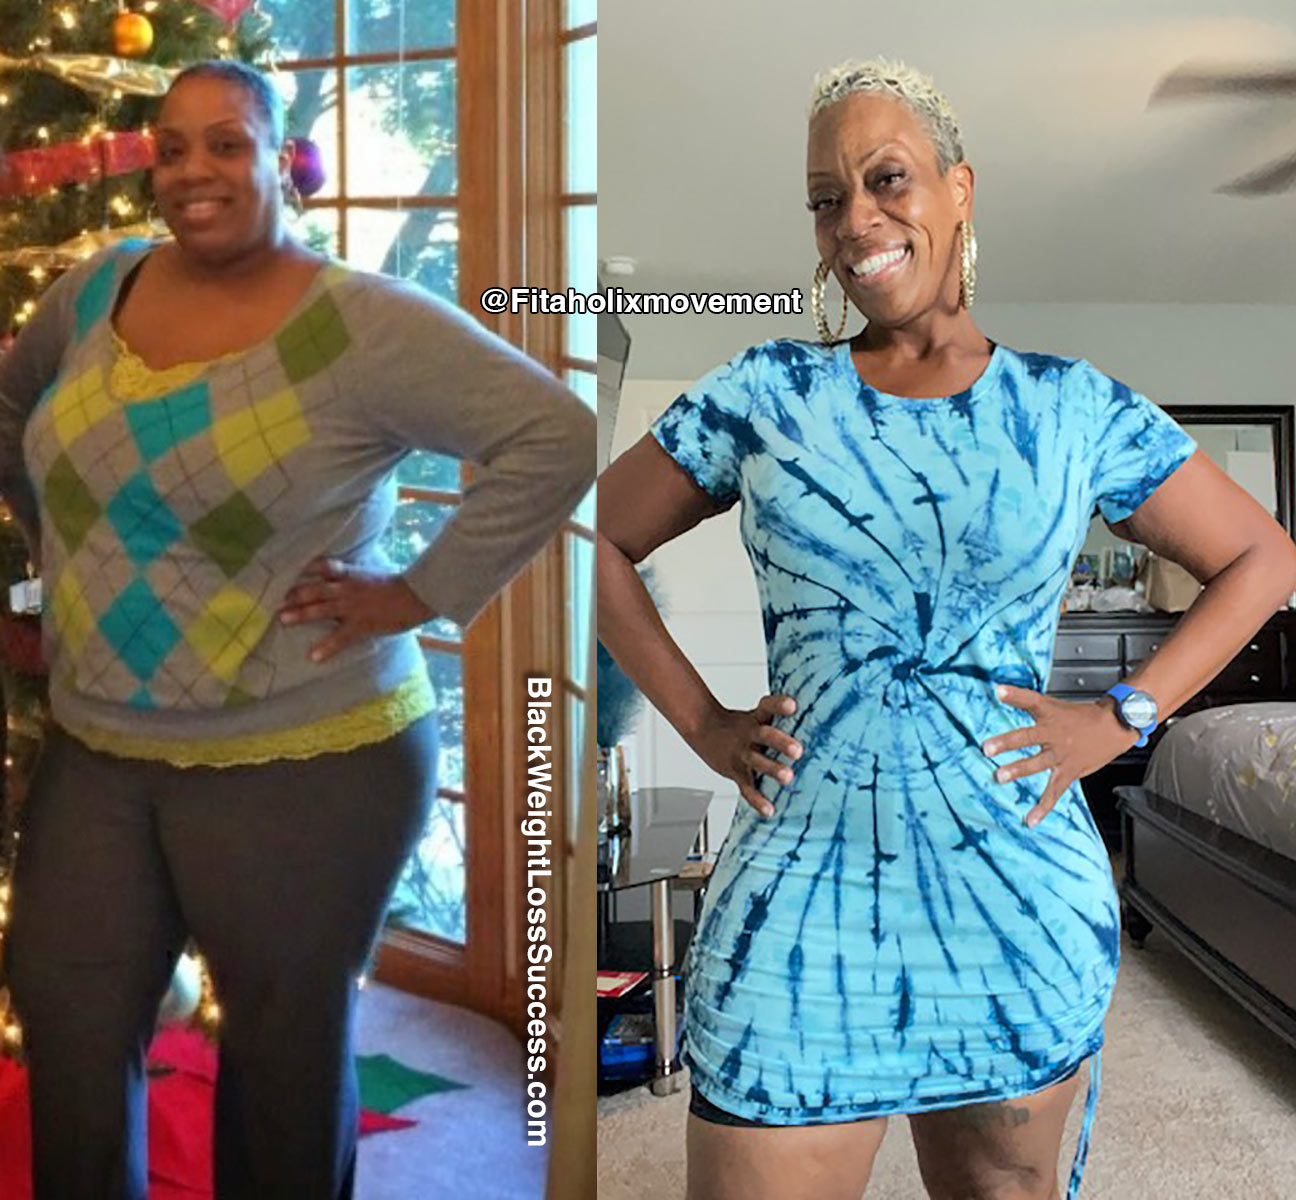 Sharice before and after weight loss